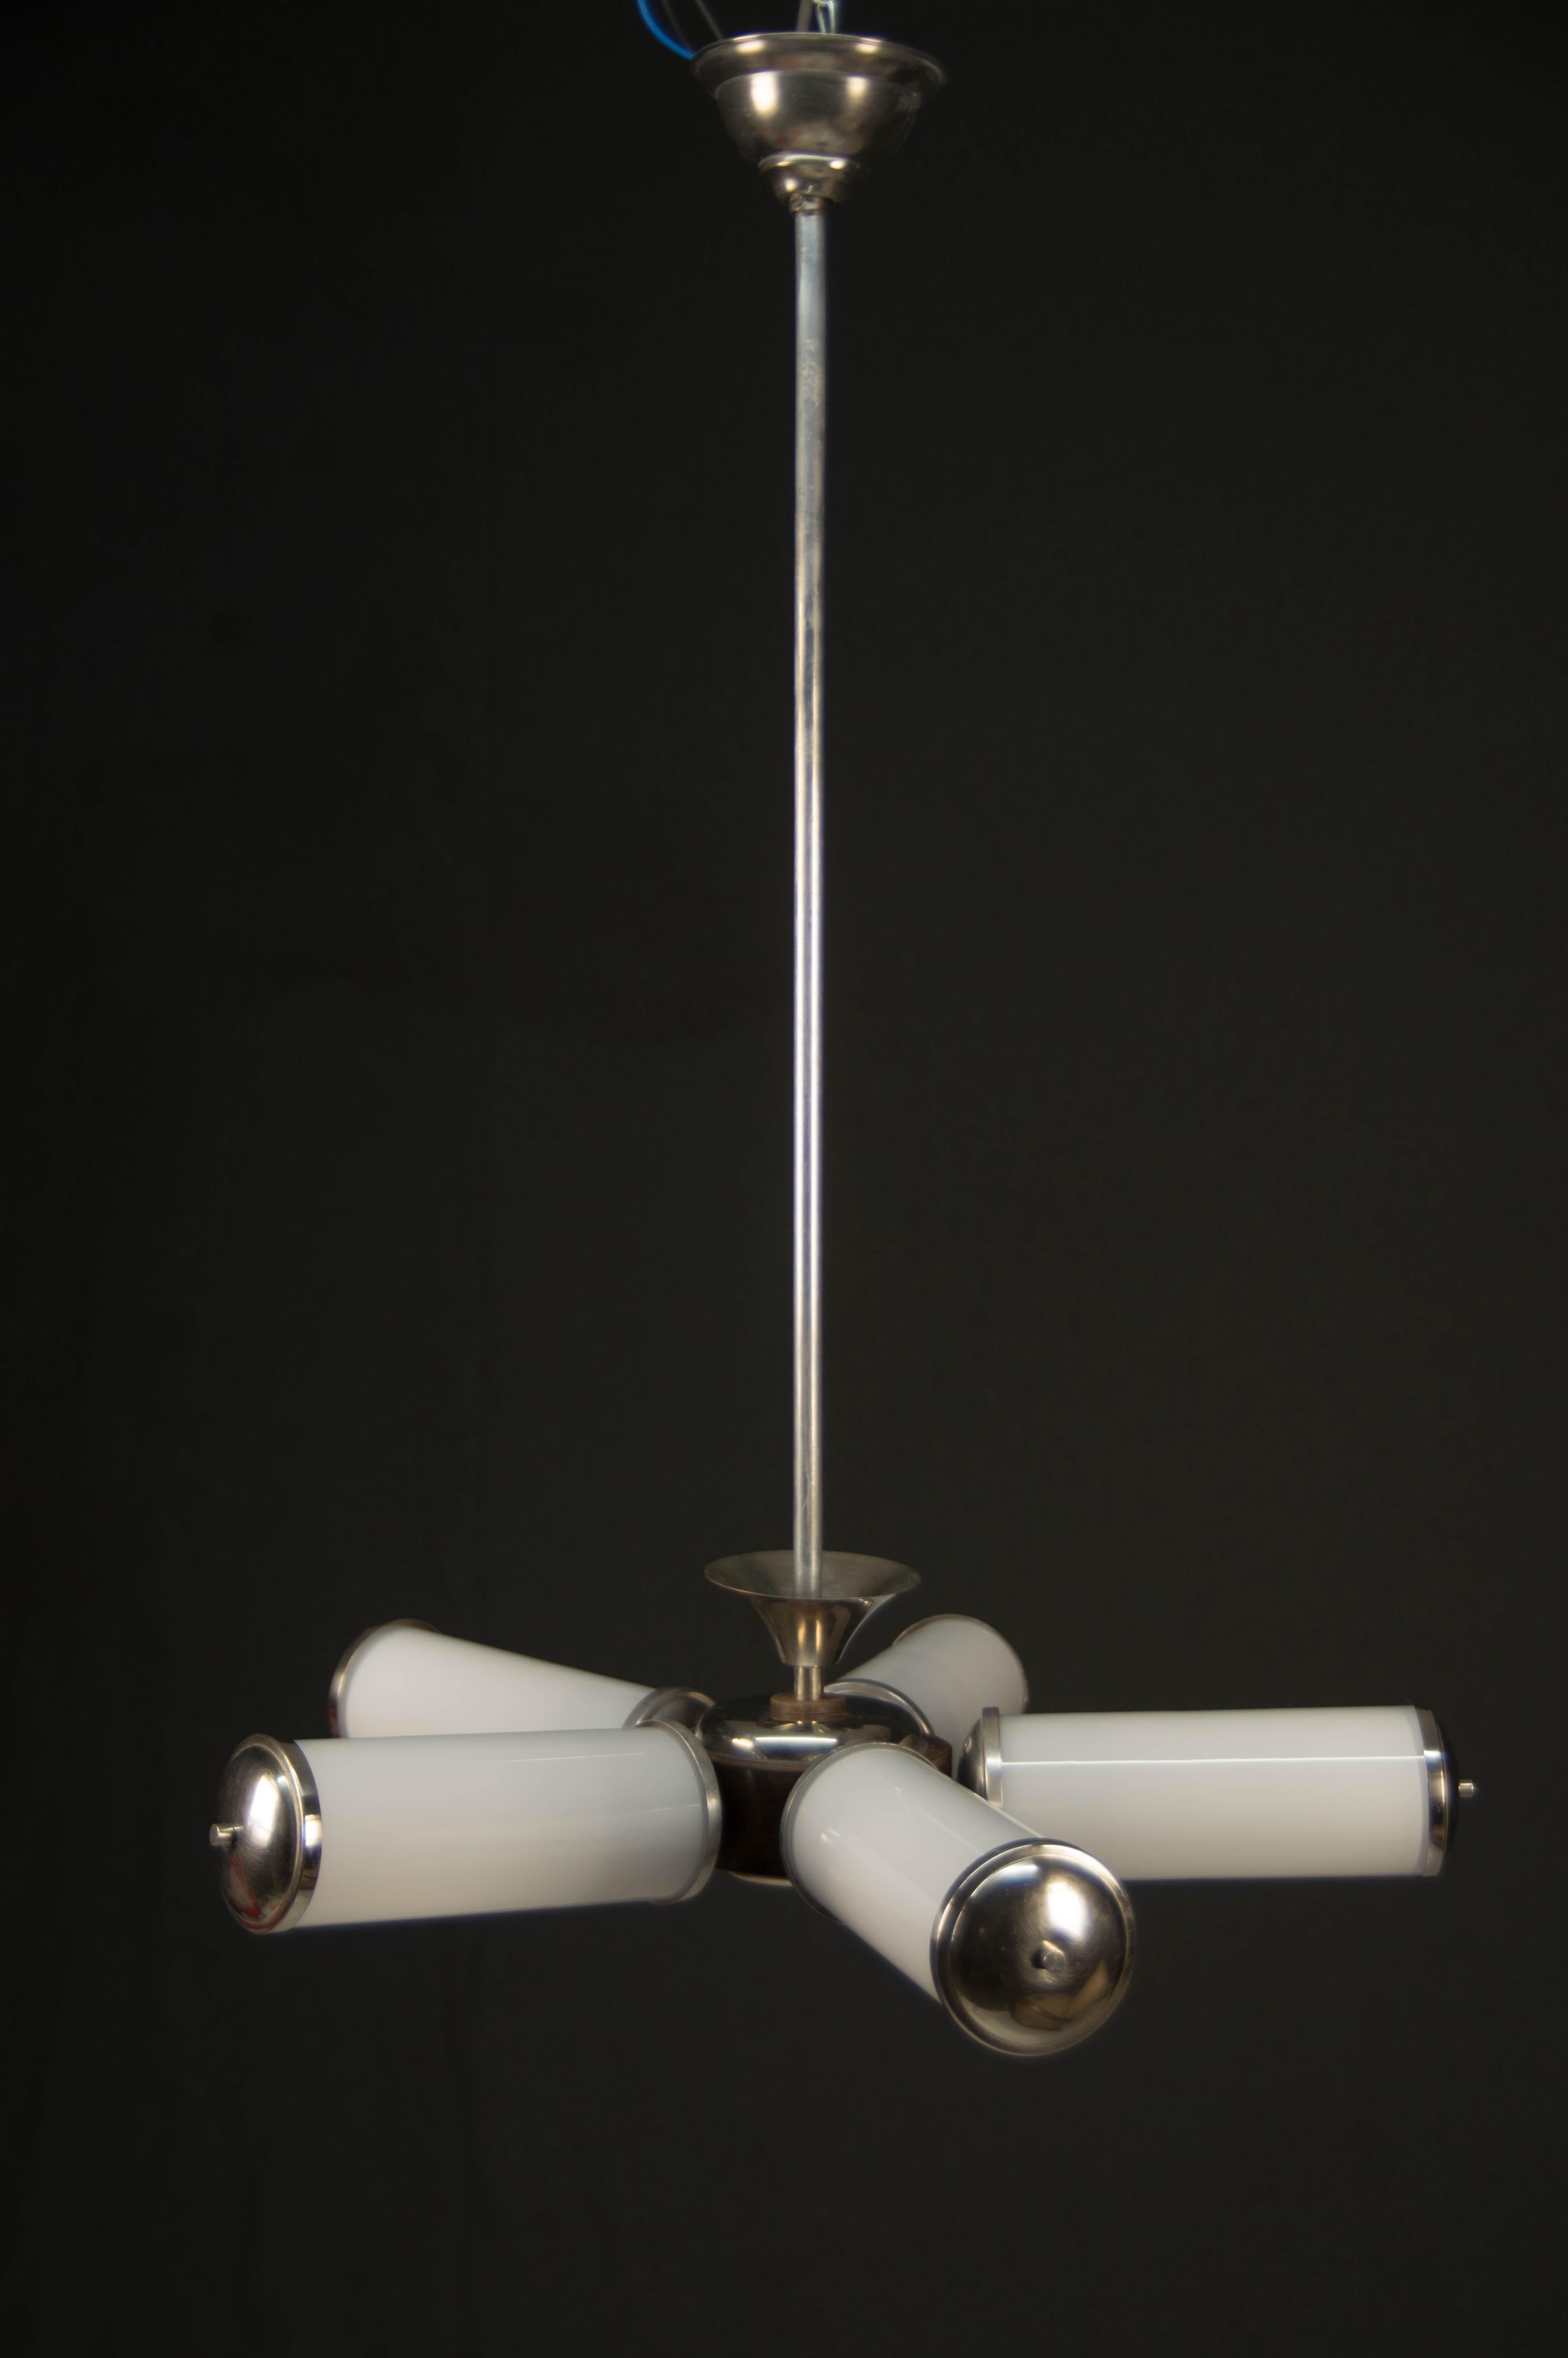 5-flamming Bauhaus chandelier. Two separate circuits. New glass shades. Rewired. Minor age patina. Cleaned and polished.
5 x 40W, E25 or E26 or E27 bulbs. Compatible with US wiring.